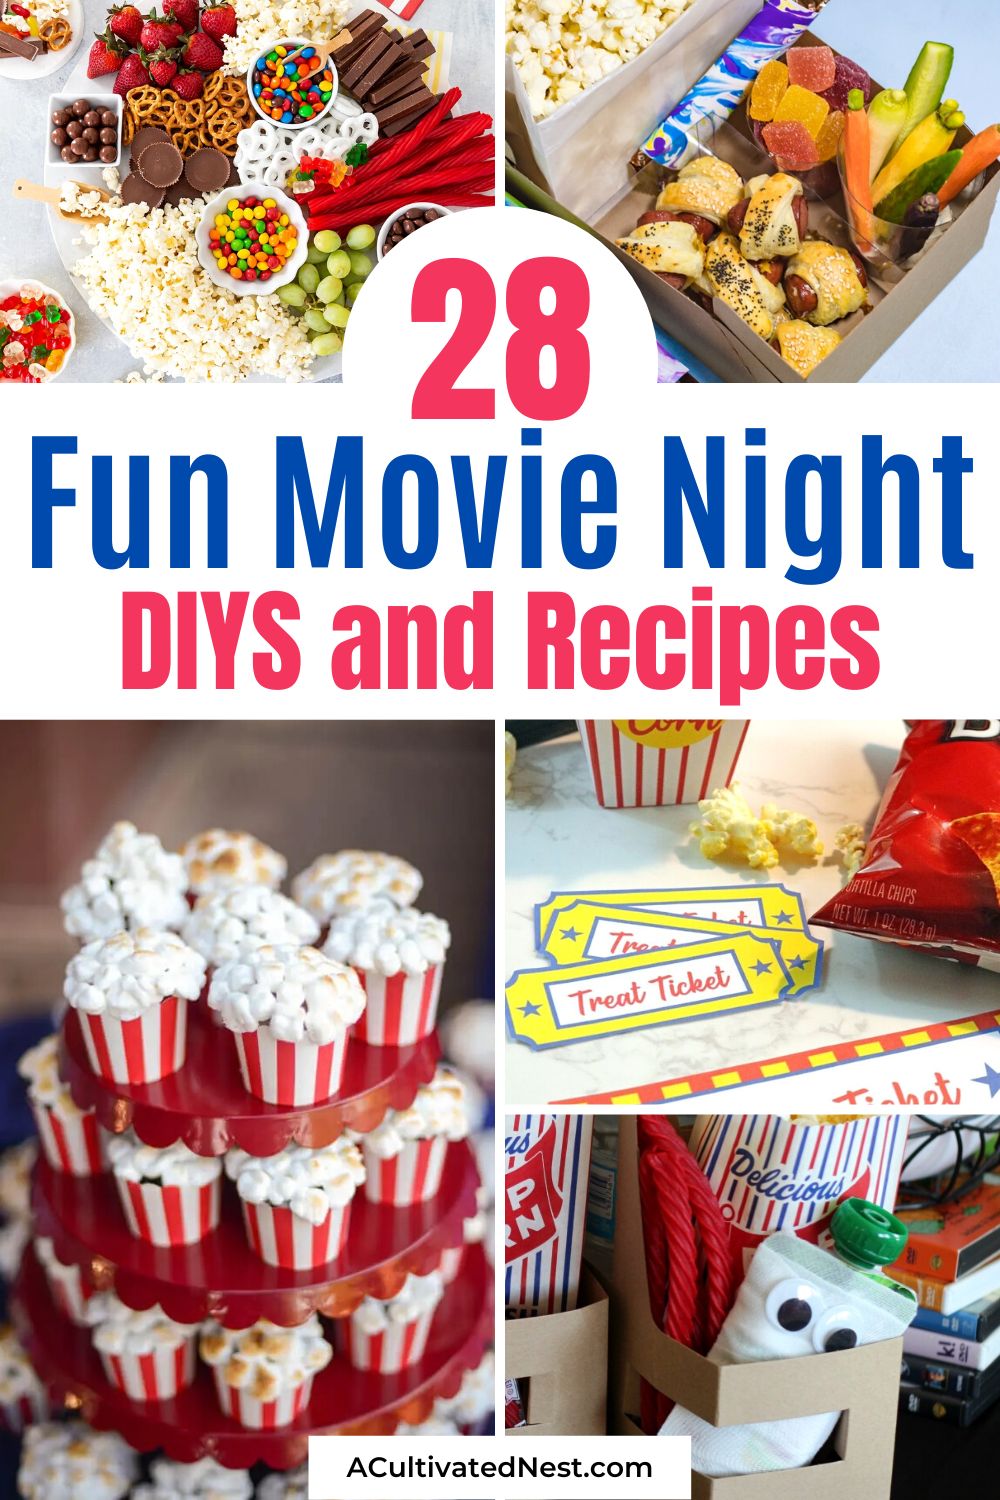 28 Fun Movie Night DIY Ideas- If you want a fun movie night at home, then you need to check out these fun movie night DIY ideas and recipes! Your family is sure to love them! | #movieNightAtHome #familyMovieNight #diyIdeas #recipes #ACultivatedNest